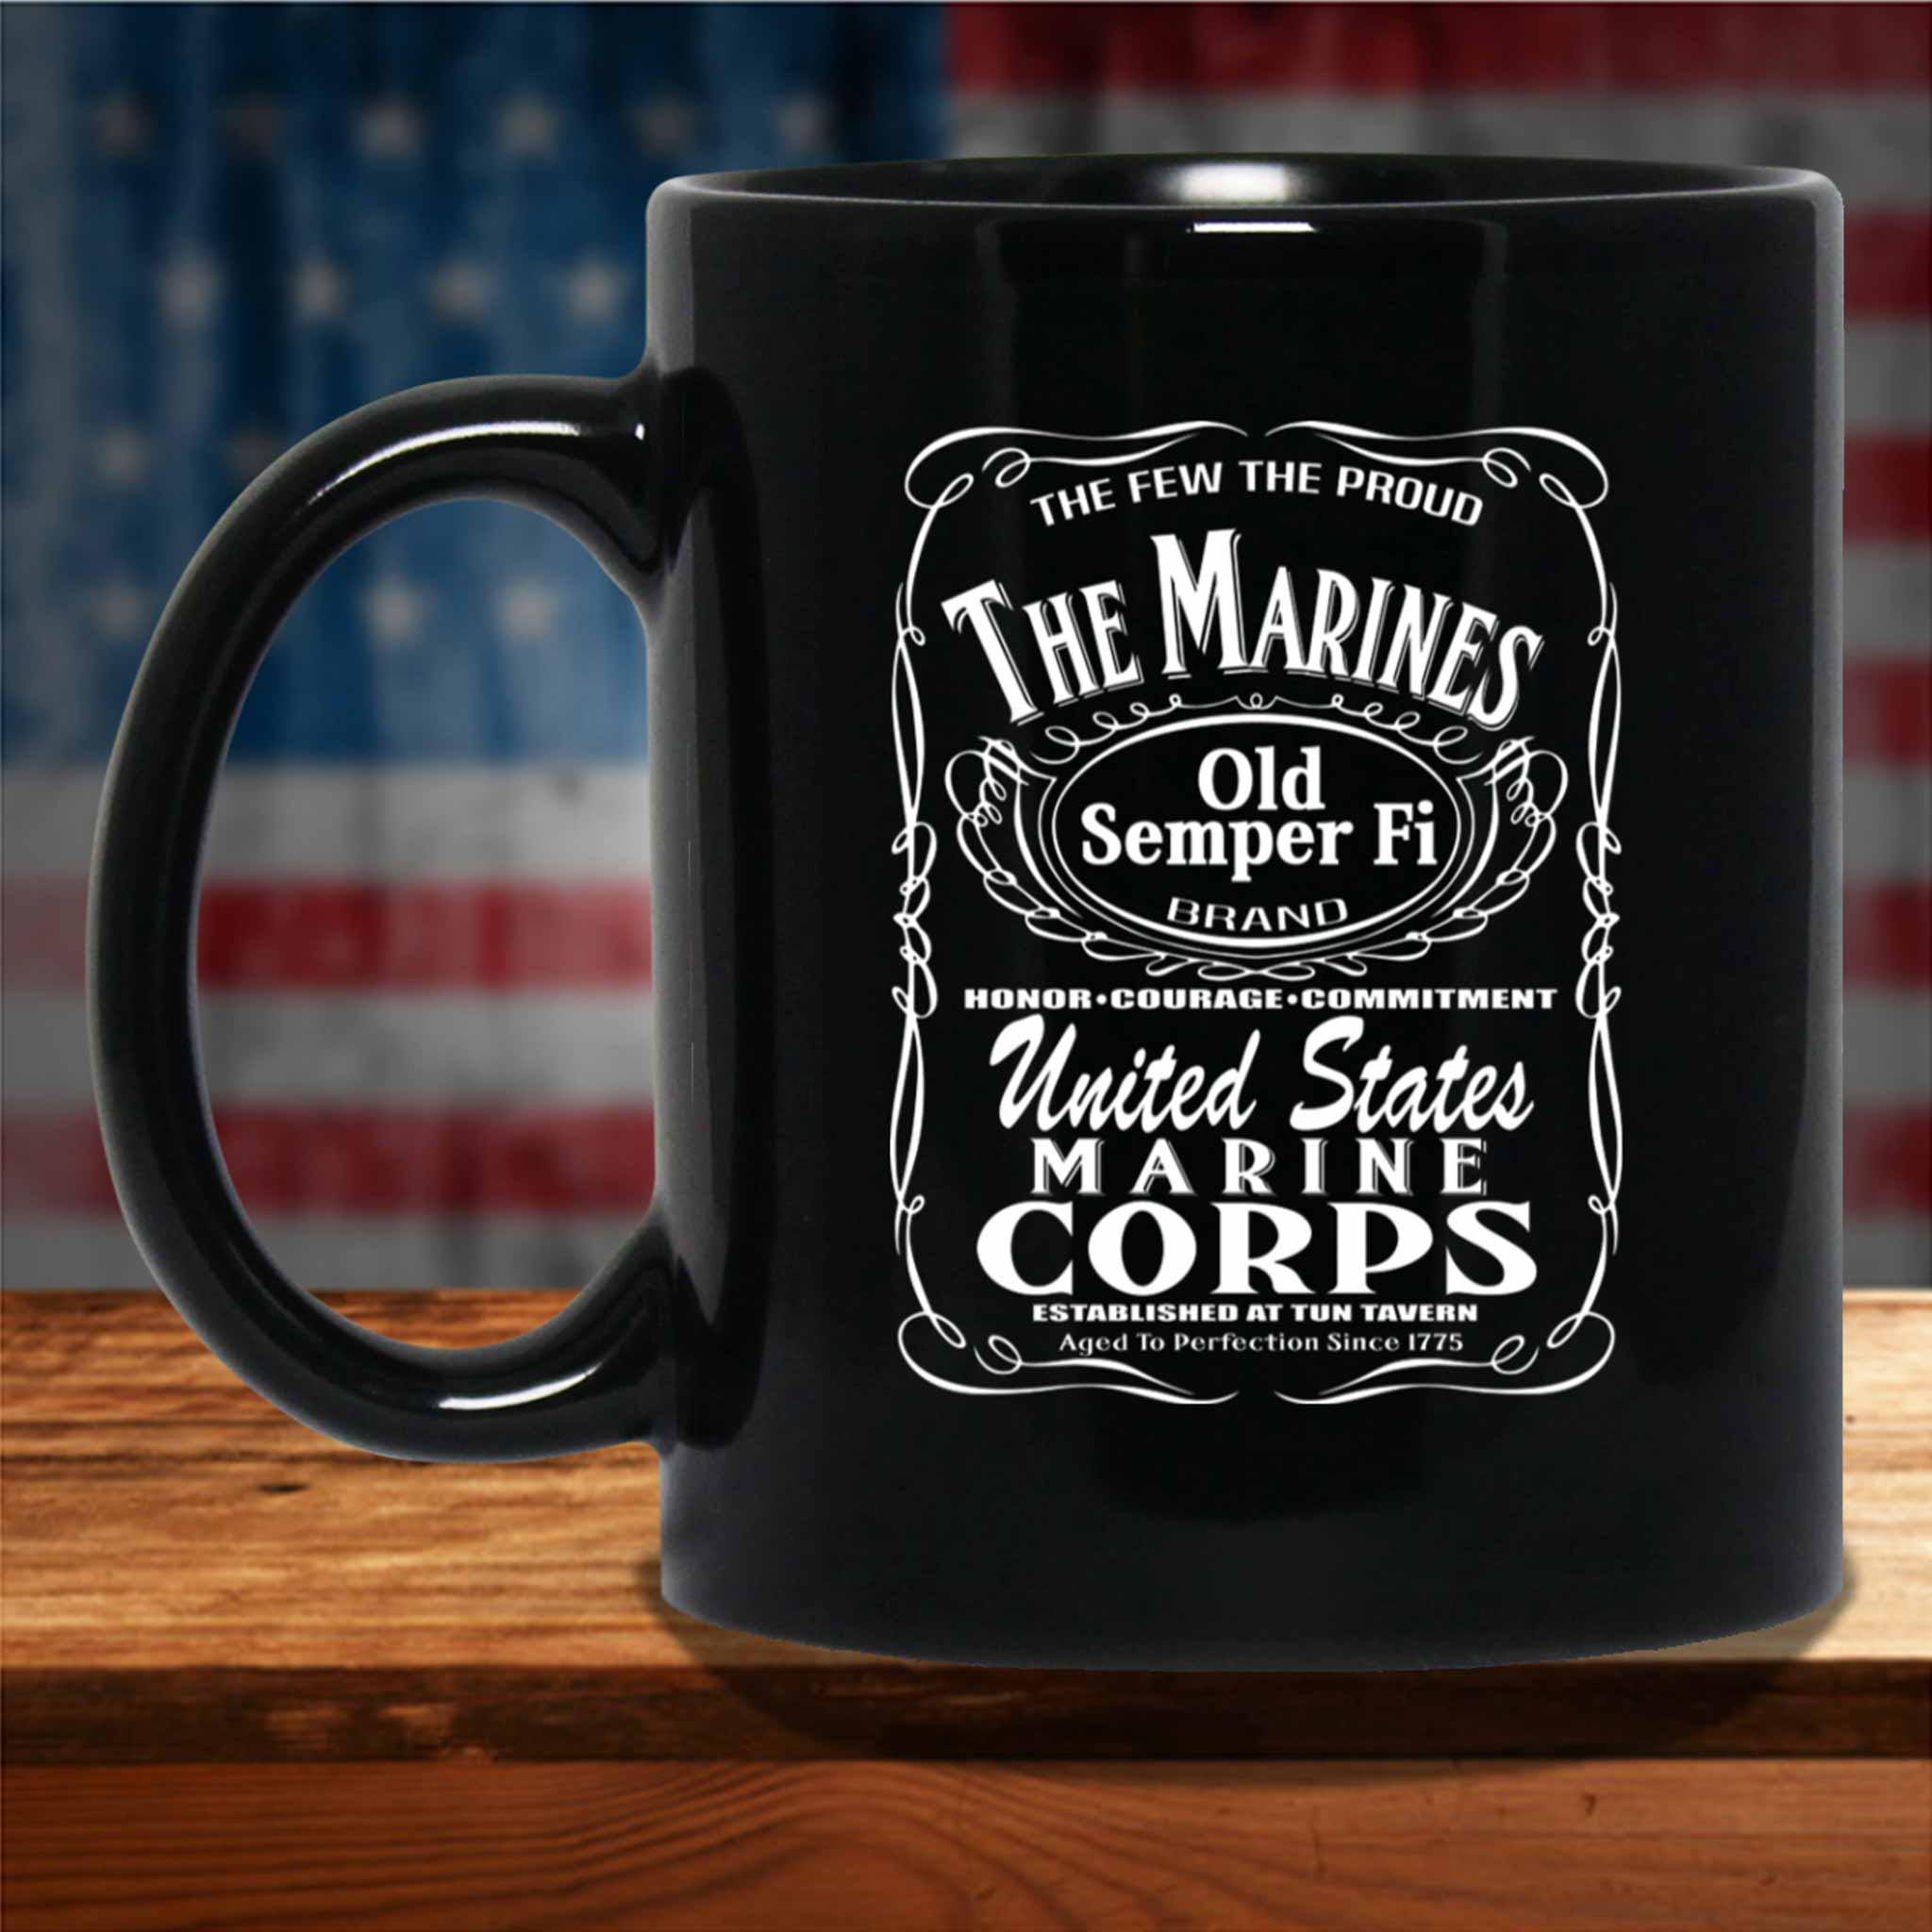 The Marine Corps Aged To Perfection Military Themed Black Coffee MugsCustomly Gifts